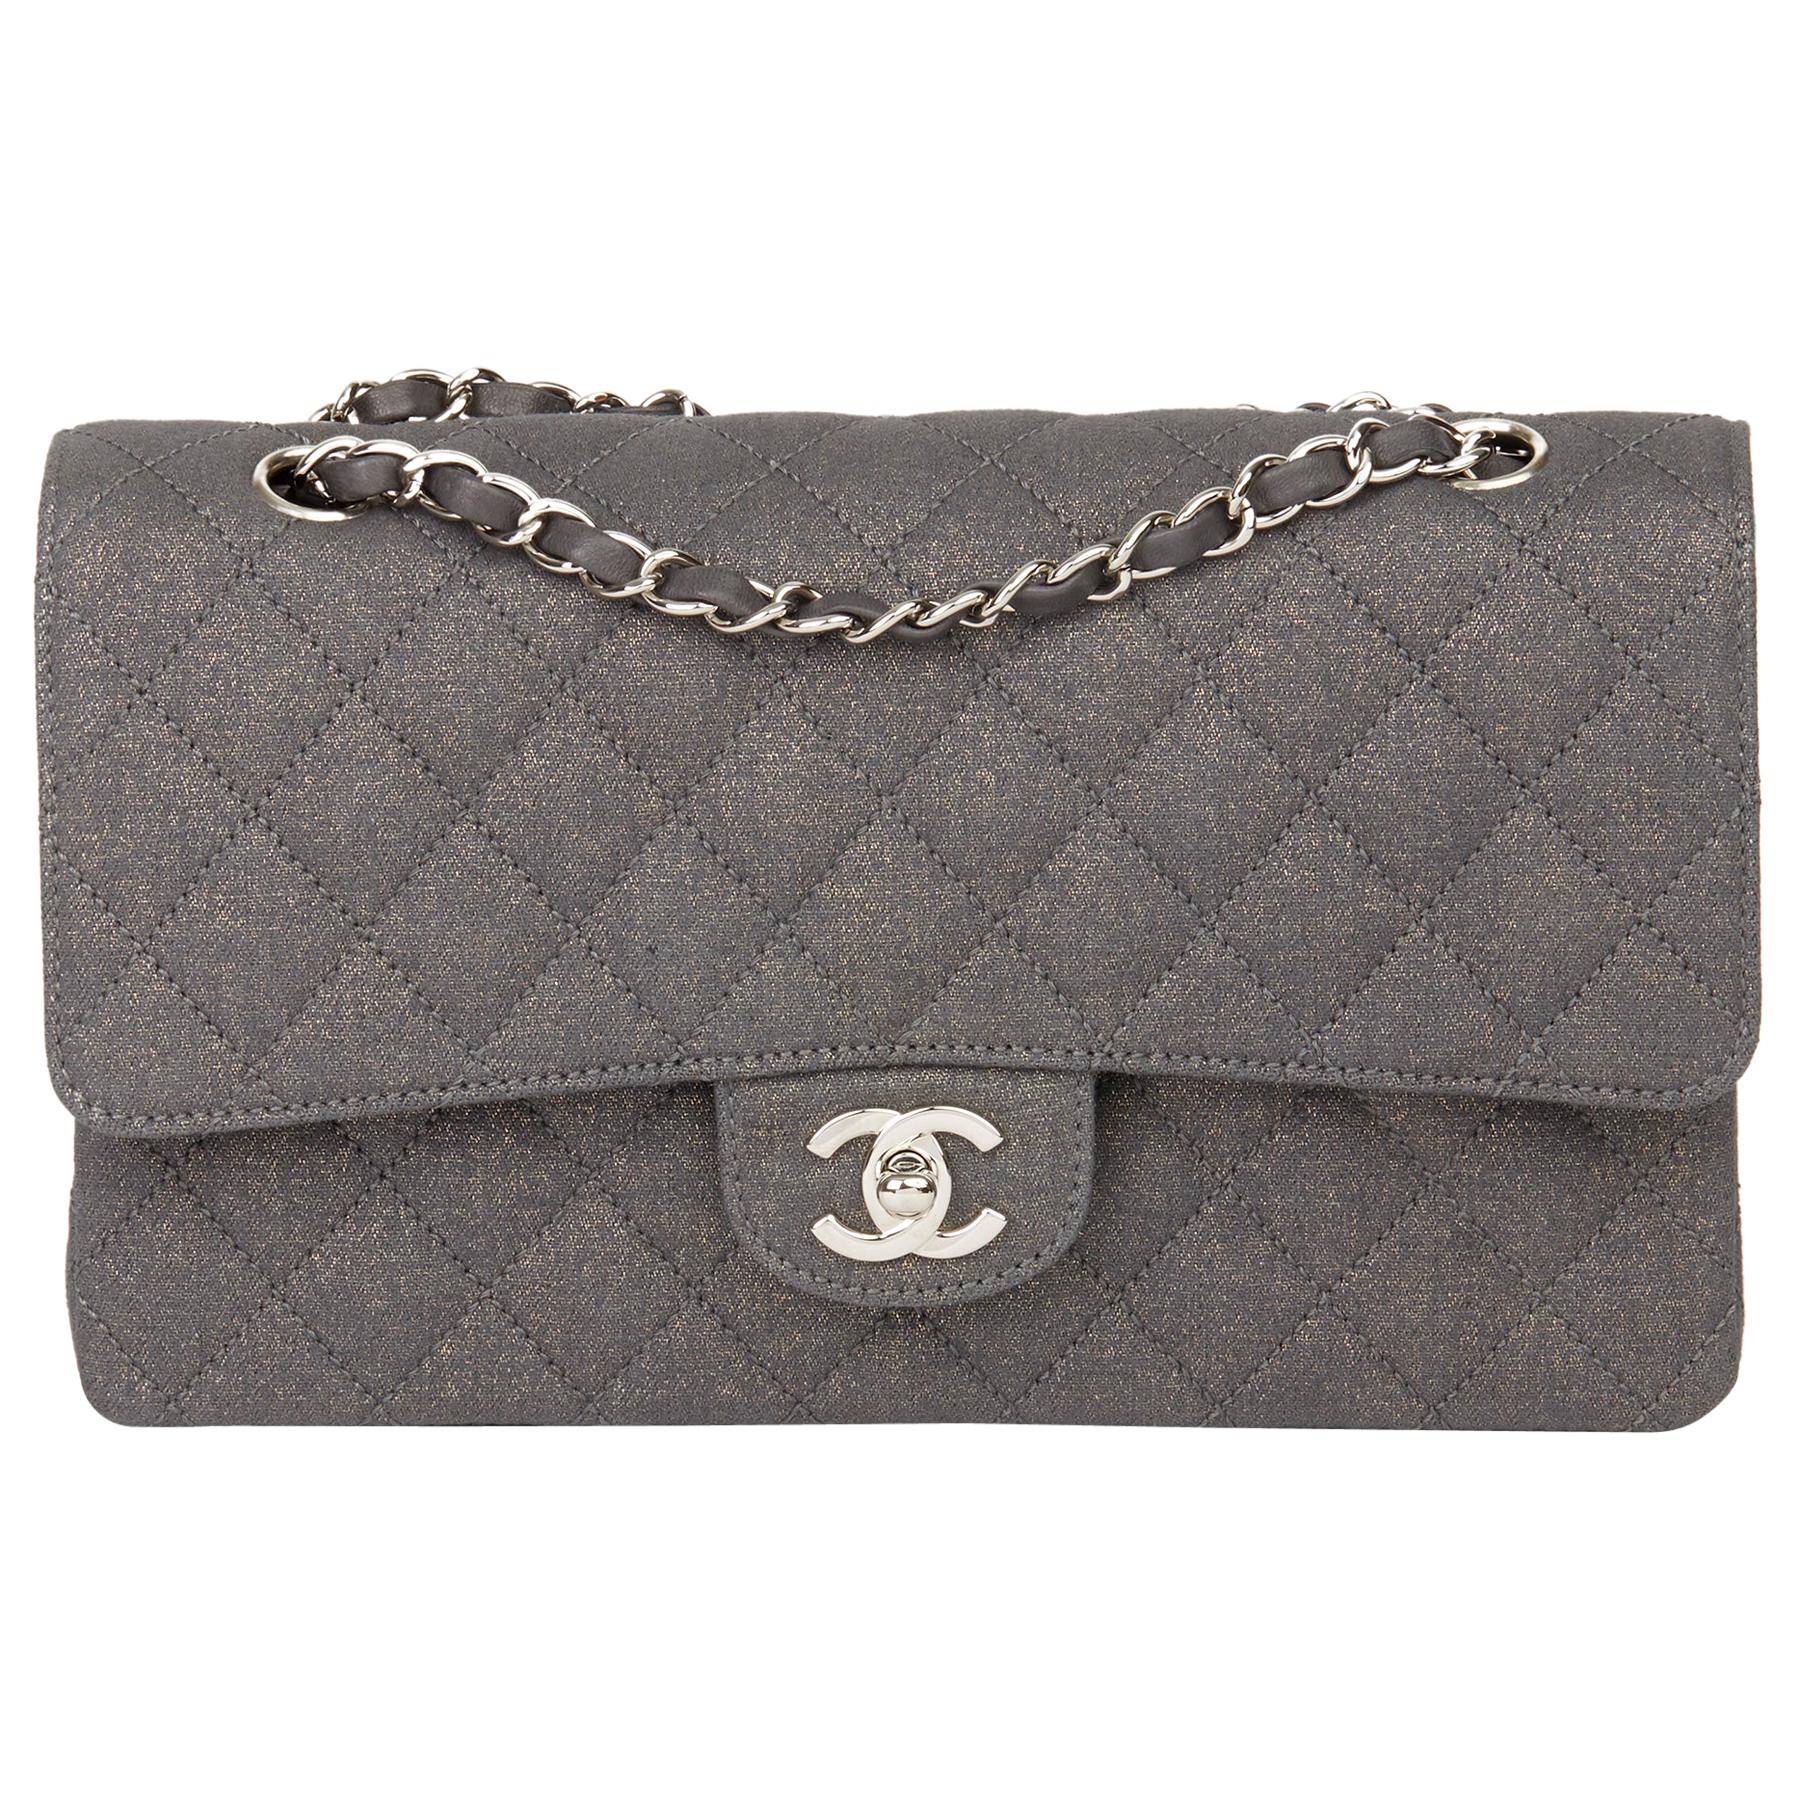 2005 Chanel Grey Quilted Metallic Canvas Medium Classic Double Flap Bag 